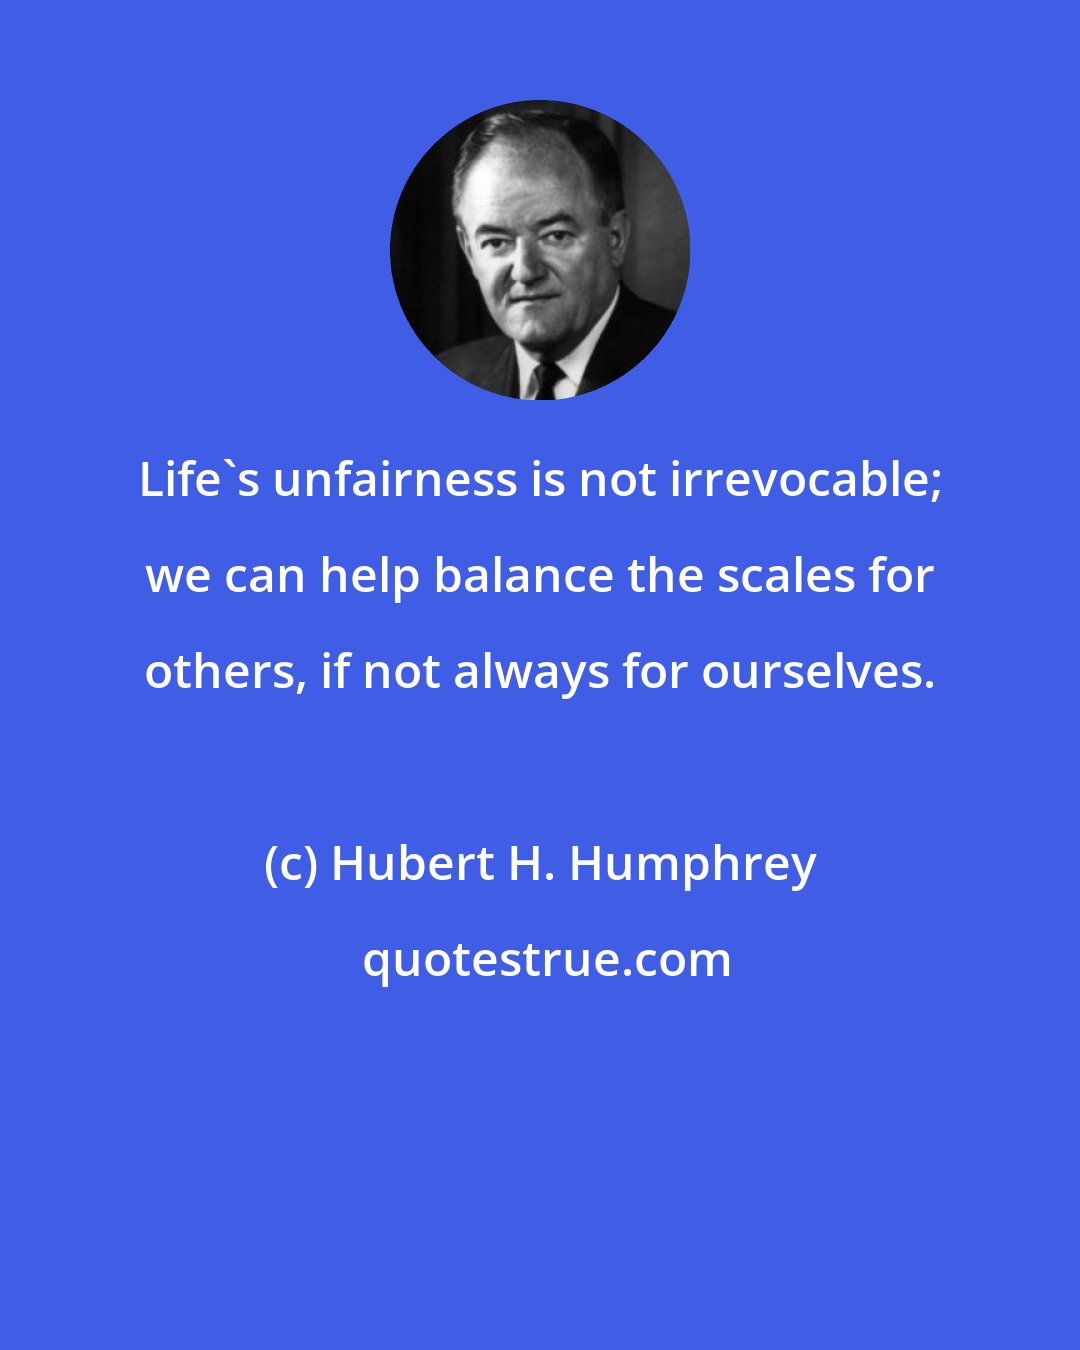 Hubert H. Humphrey: Life's unfairness is not irrevocable; we can help balance the scales for others, if not always for ourselves.